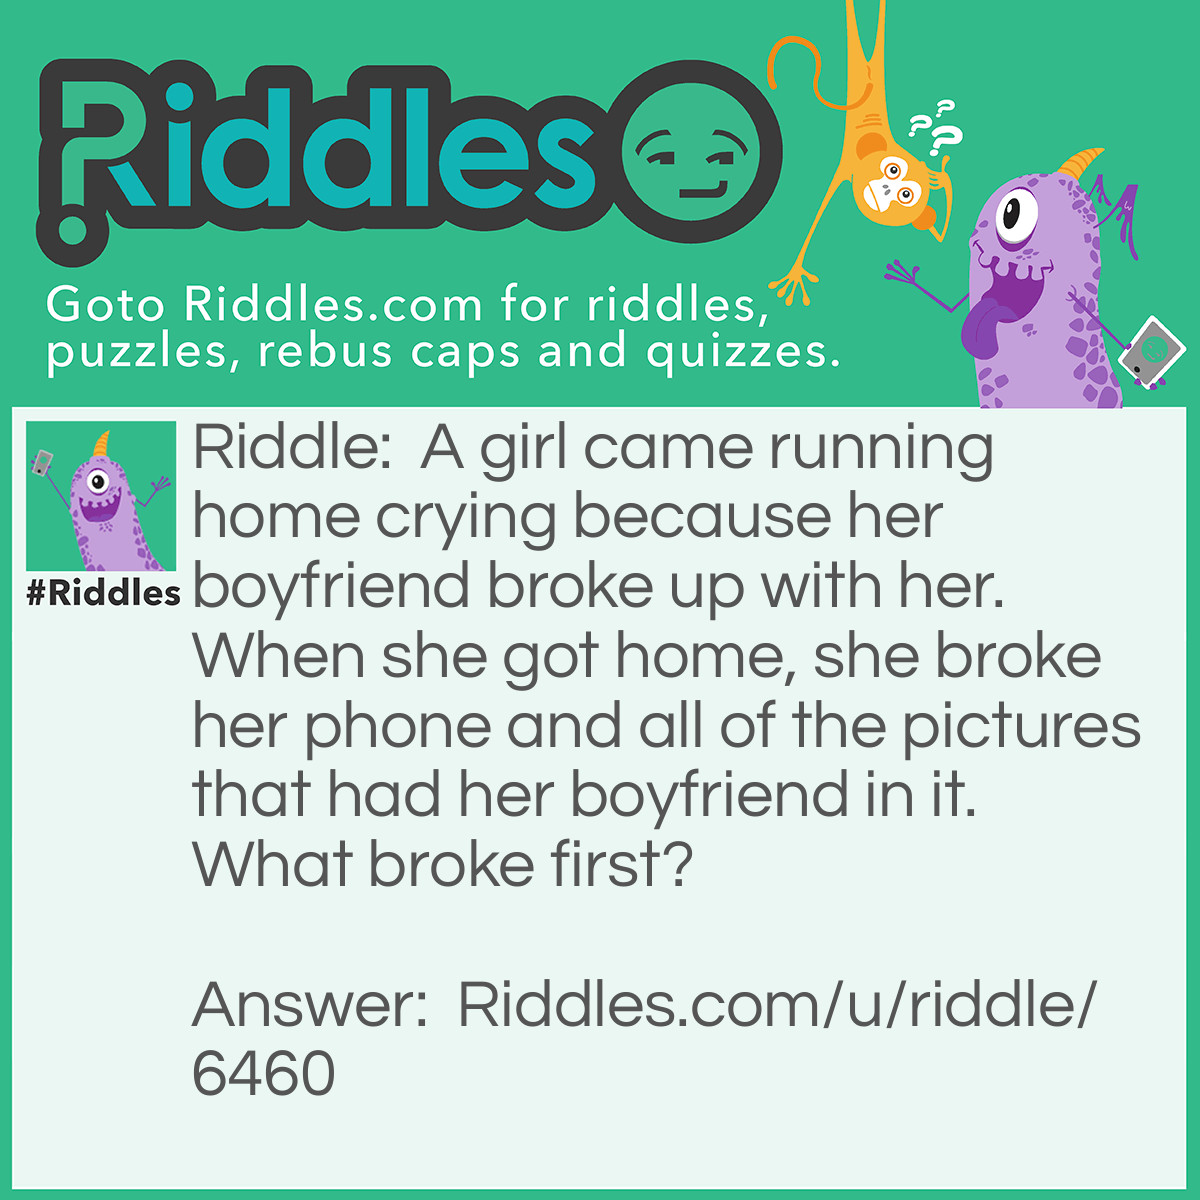 Riddle: A girl came running home crying because her boyfriend broke up with her. When she got home, she broke her phone and all of the pictures that had her boyfriend in it. What broke first? Answer: Her heart because of her boyfriend.